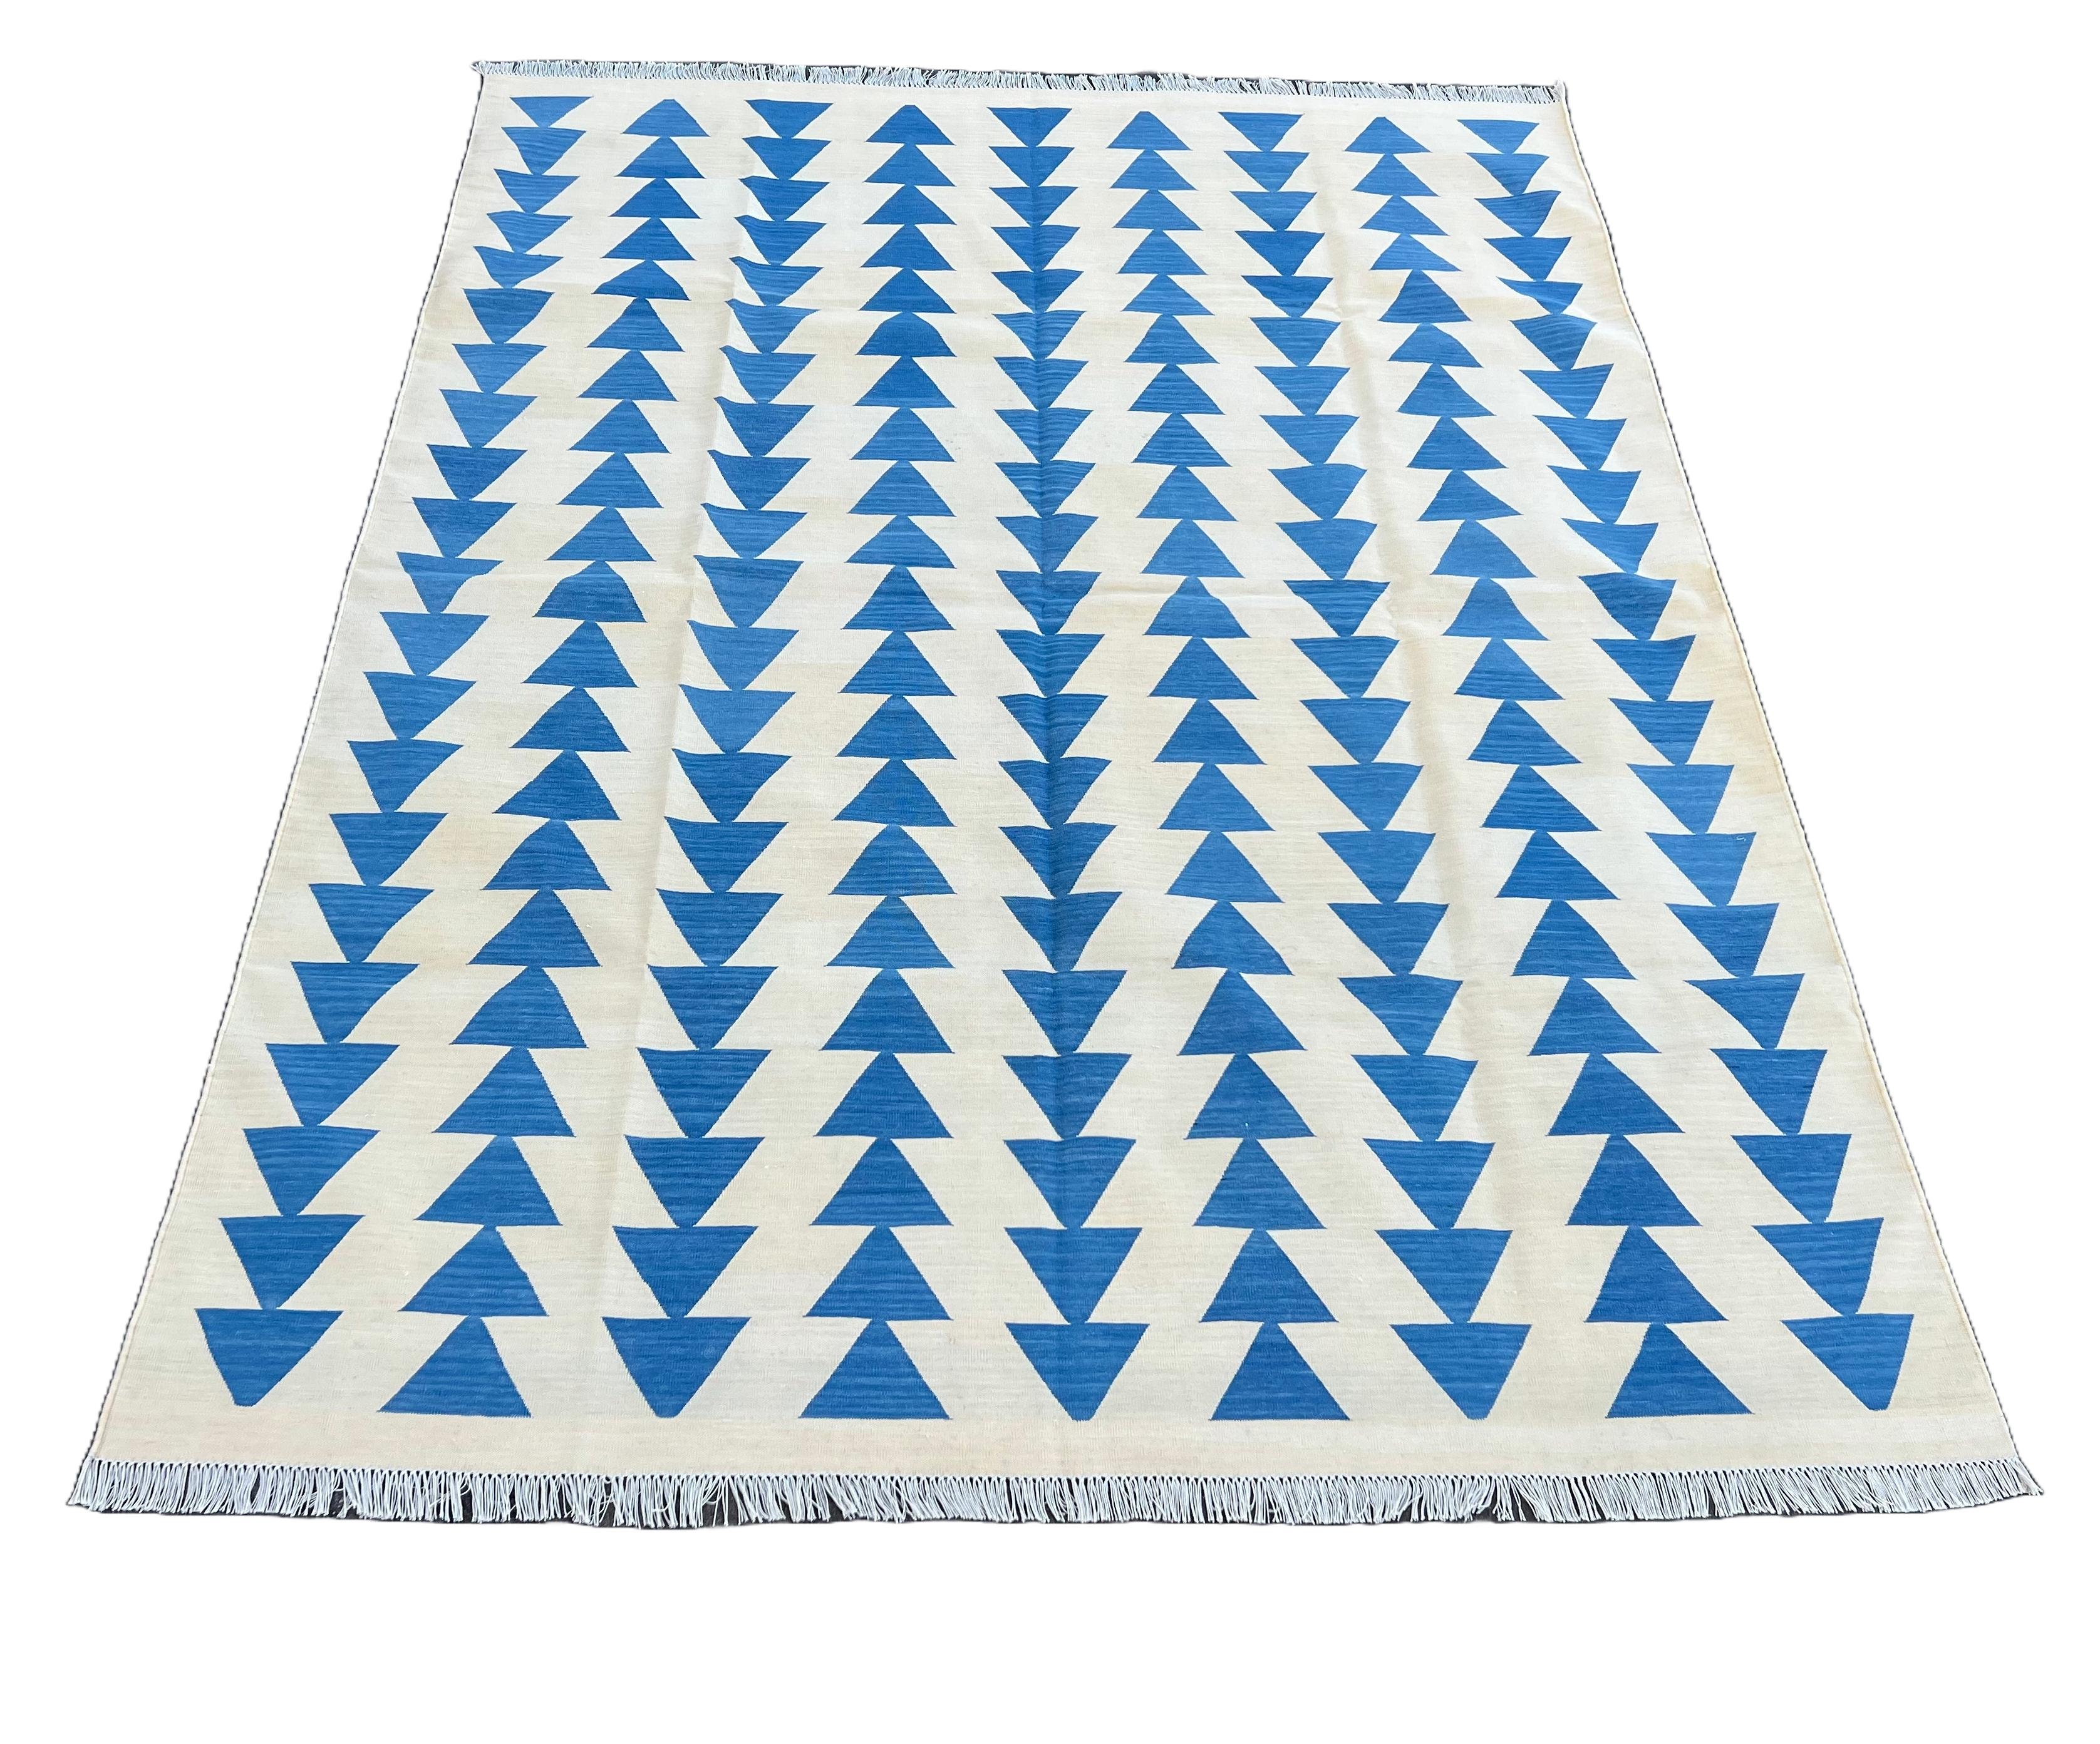 Contemporary Handmade Cotton Area Flat Weave Rug, Cream & Blue Pyramid Checked Indian Dhurrie For Sale